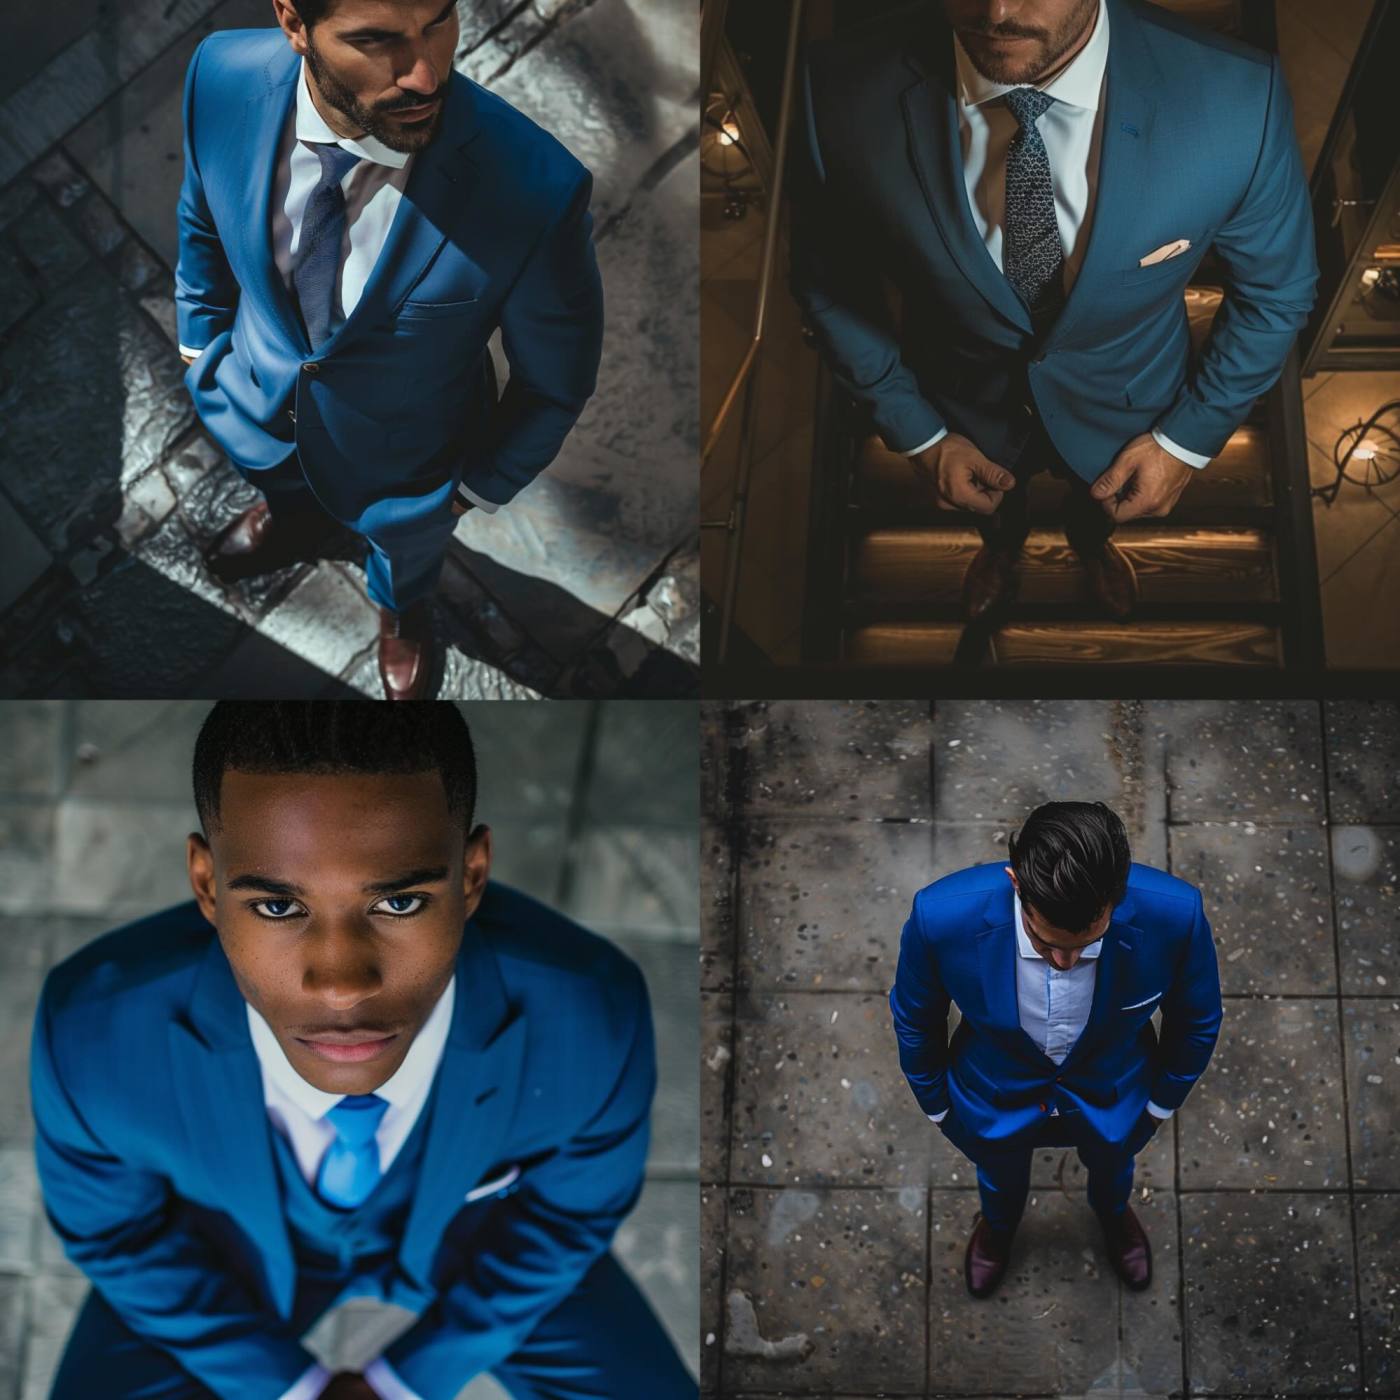 A man wearing a blue suit, high angle photograph